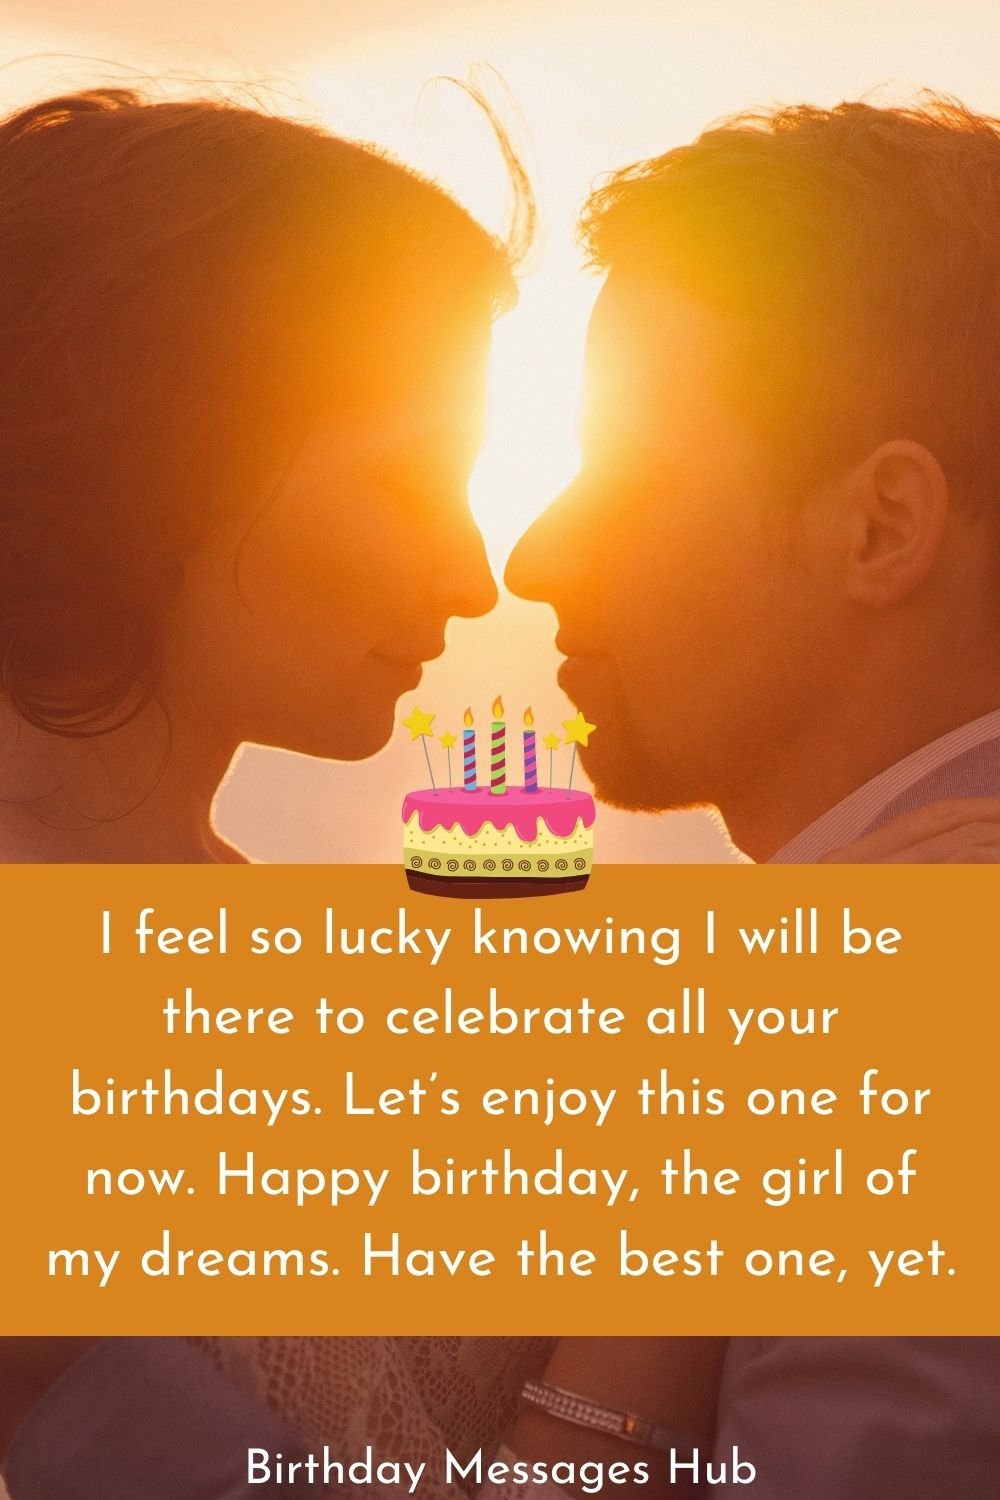 85 Memorable Happy Birthday Messages for Her! » Birthday Messages Hub